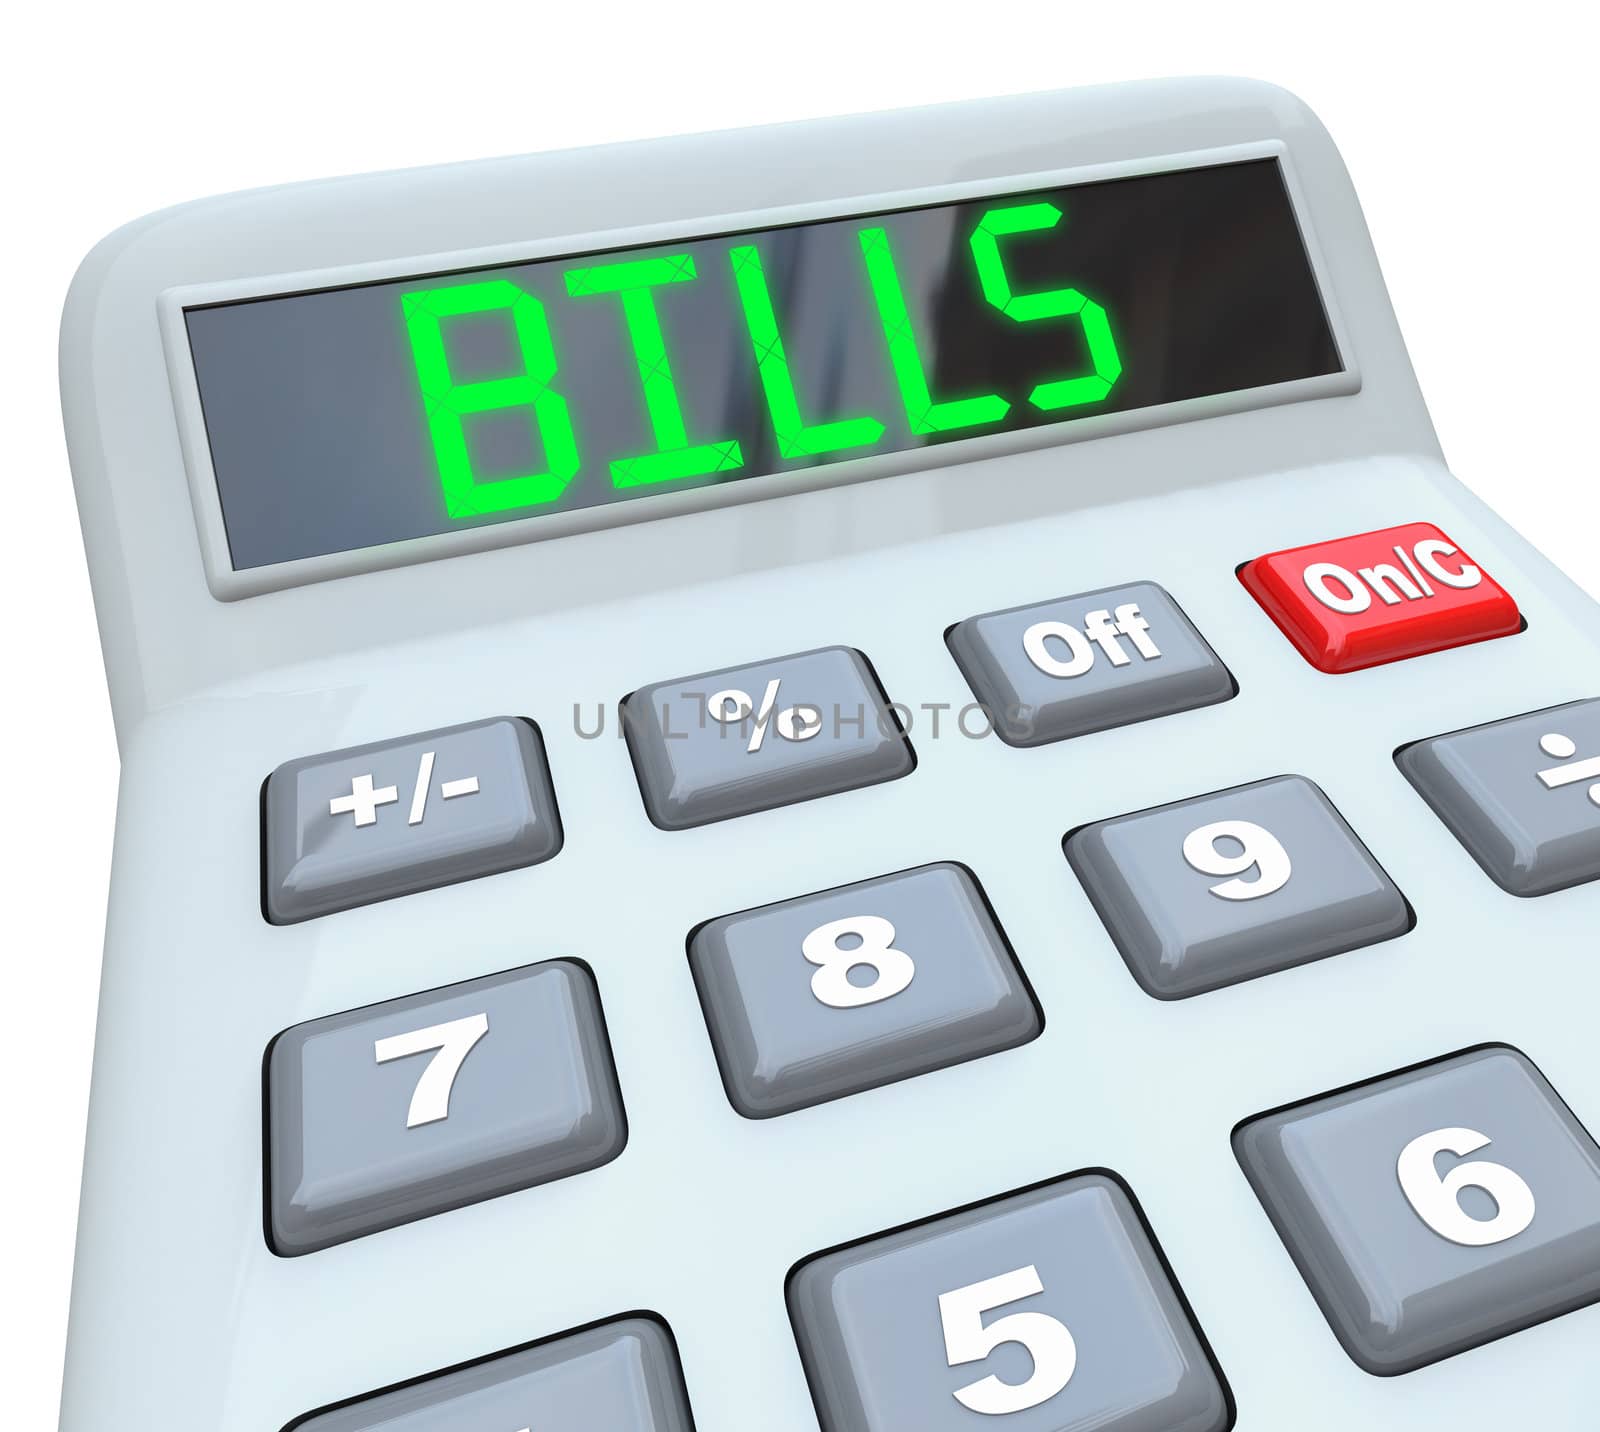 Bills - Word on Calculator for Payment of Expenses by iQoncept